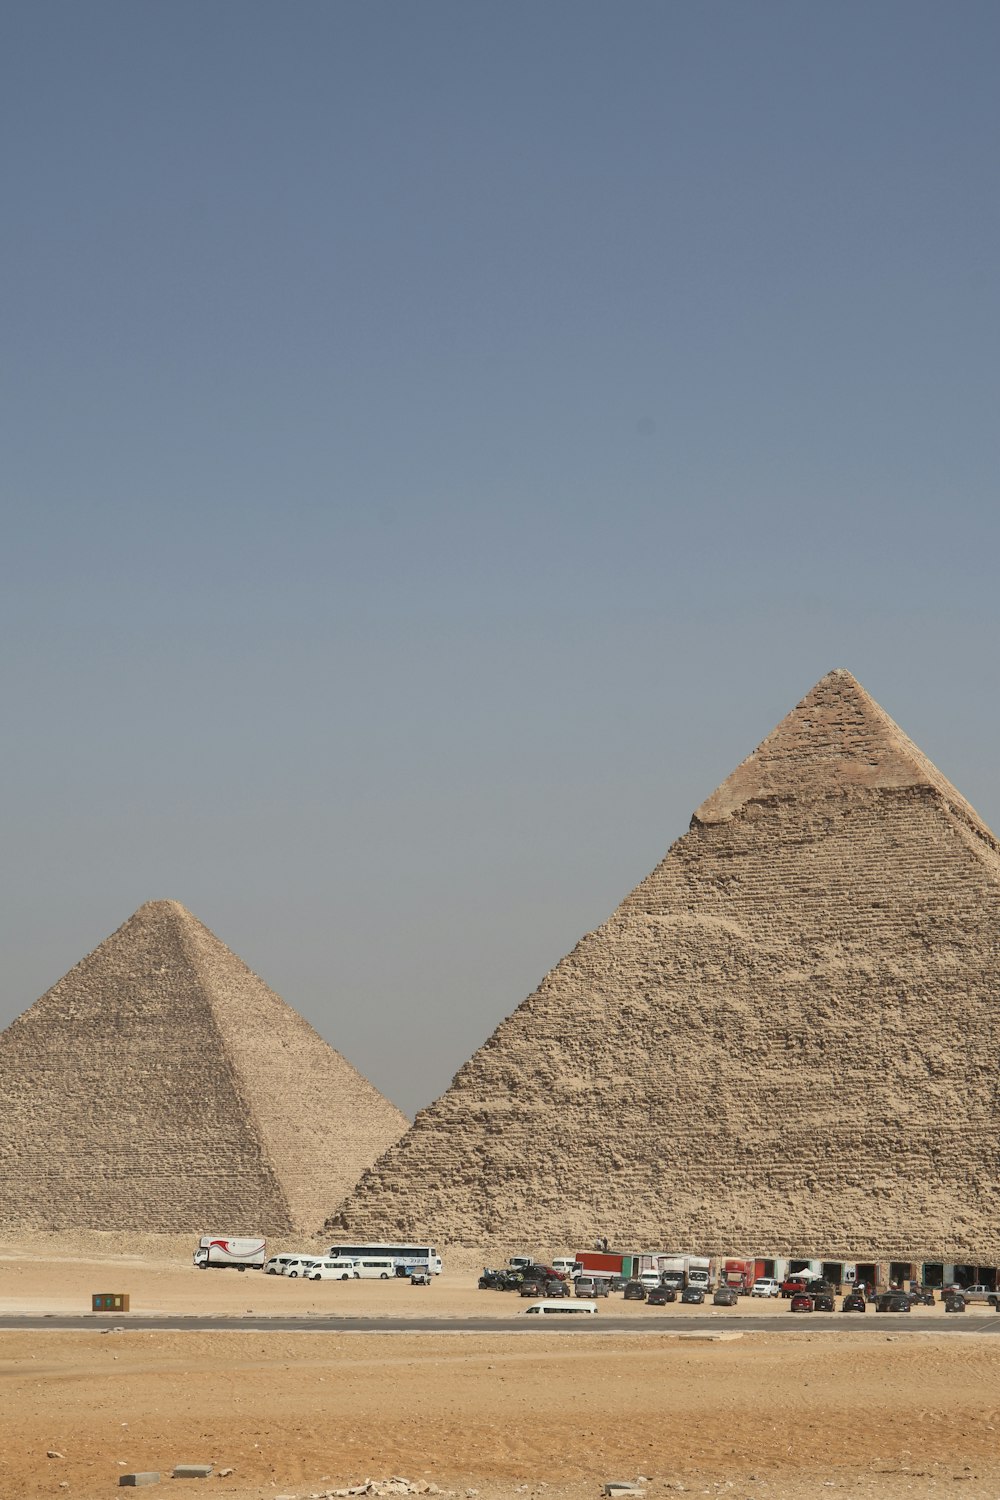 a bus driving past the pyramids of giza